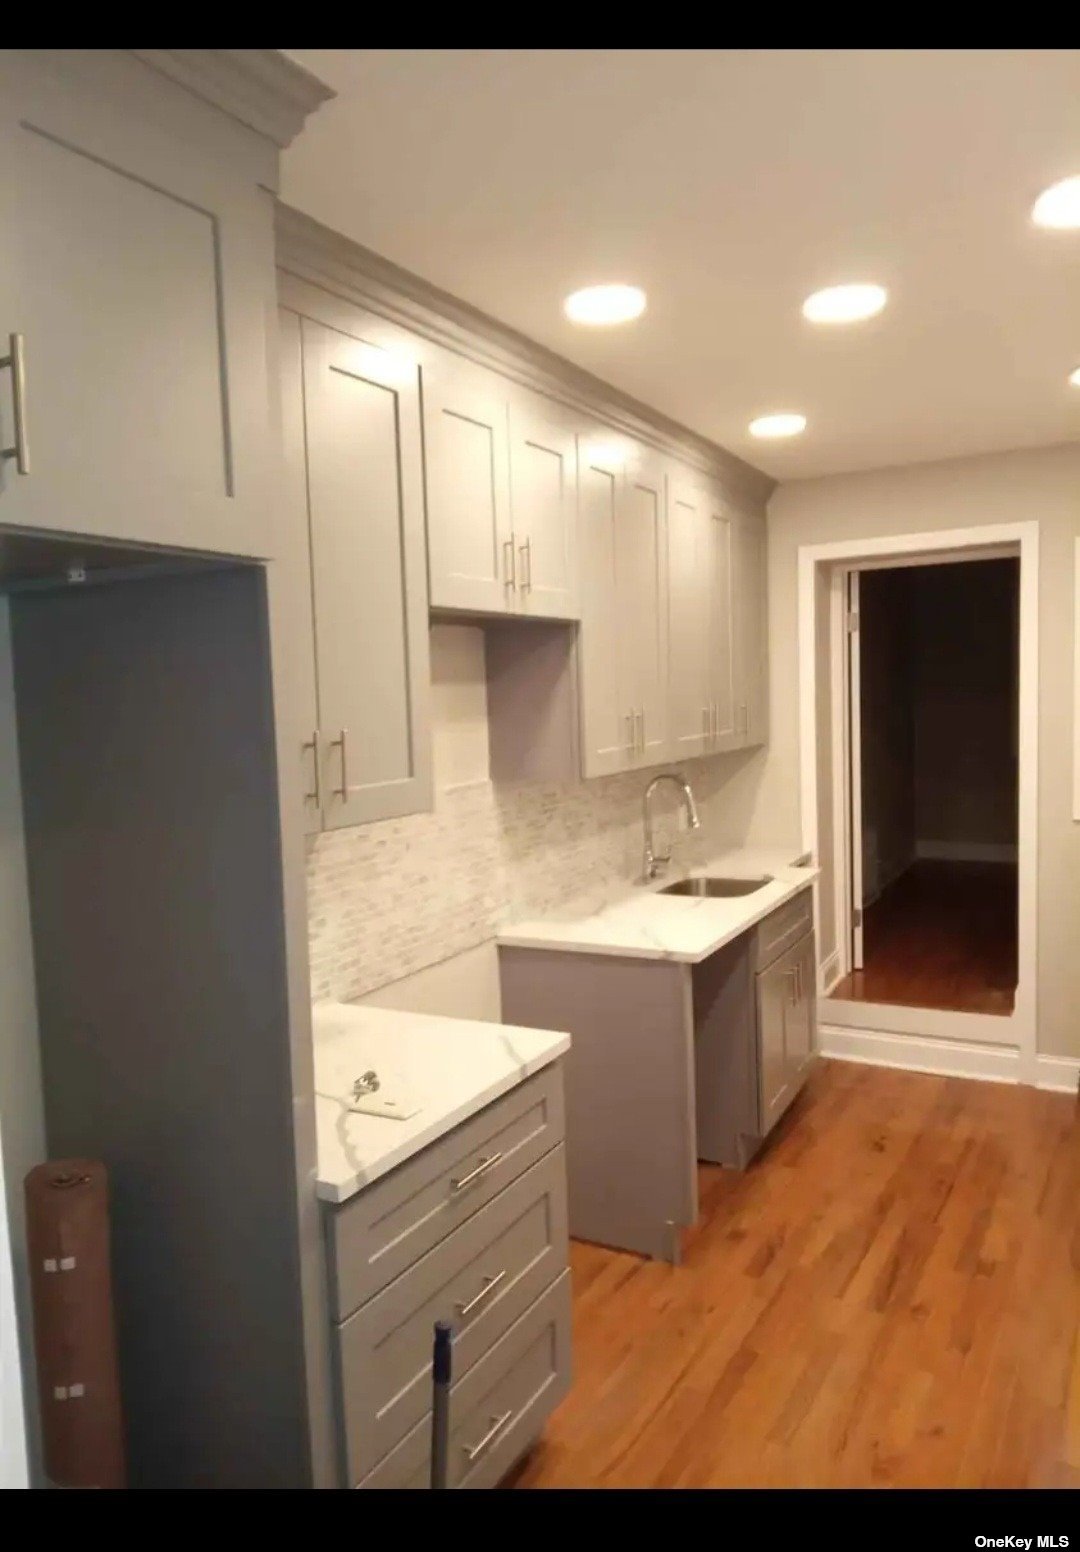 Apartment in Crown Heights - Prospect  Brooklyn, NY 11213